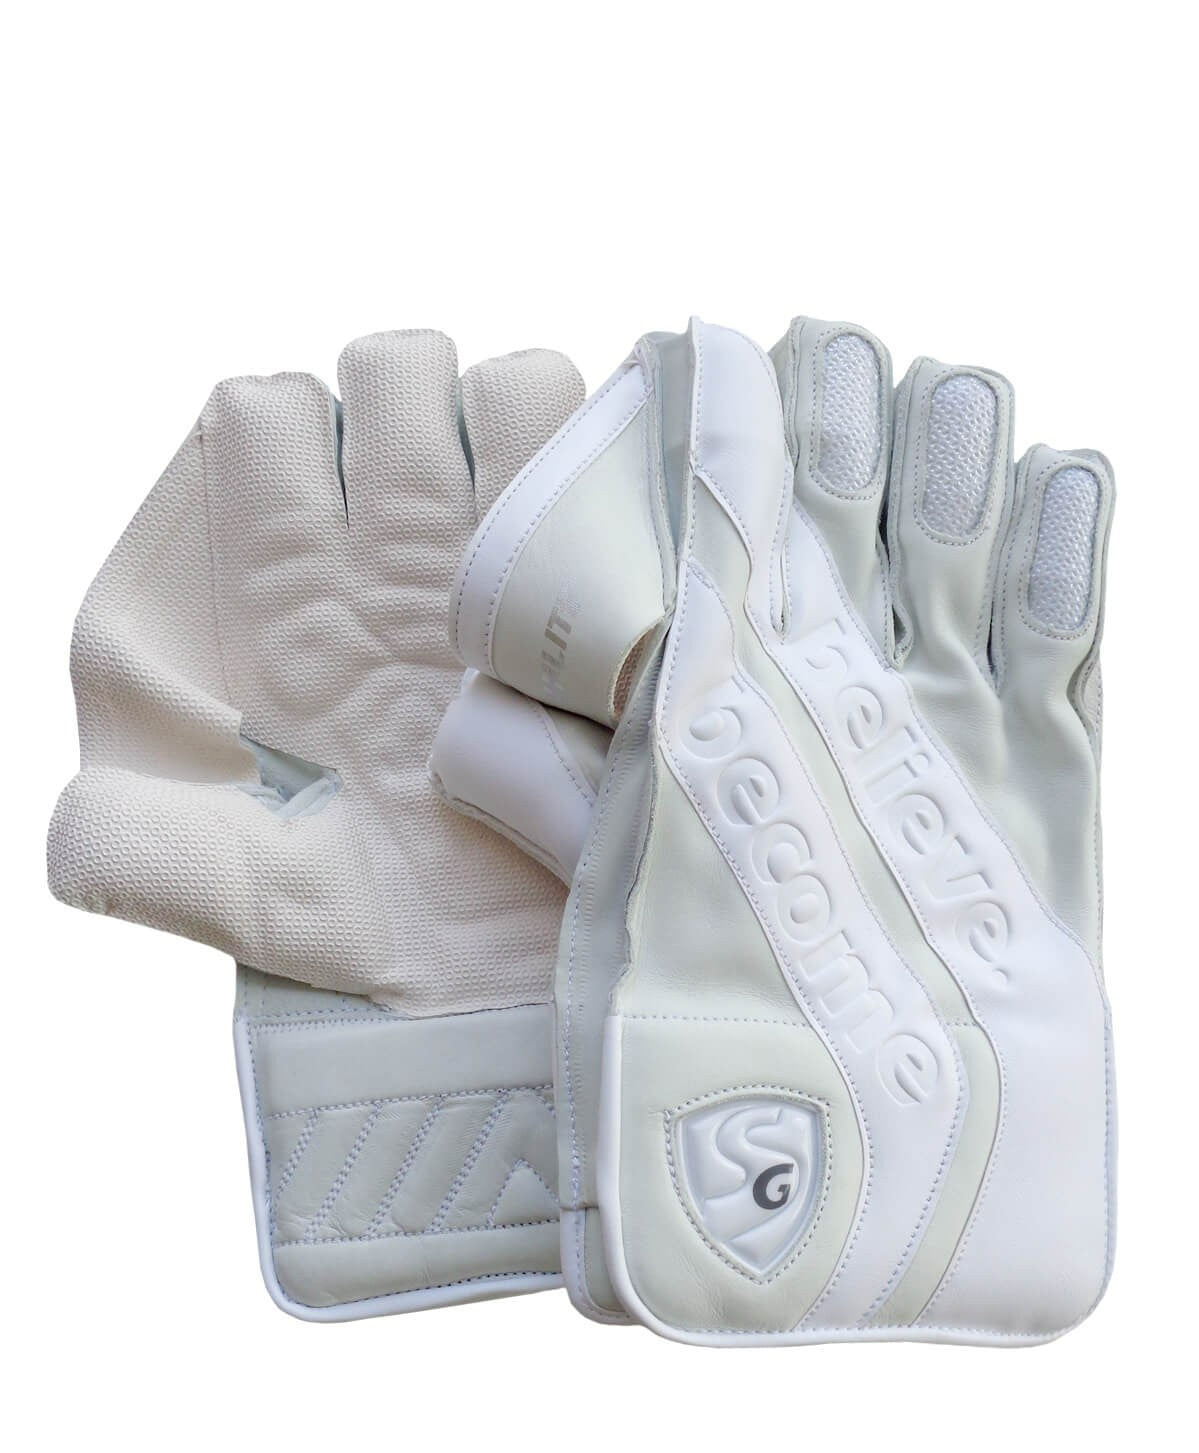 SG HILITE FULL WHITE WICKET KEEPING GLOVES